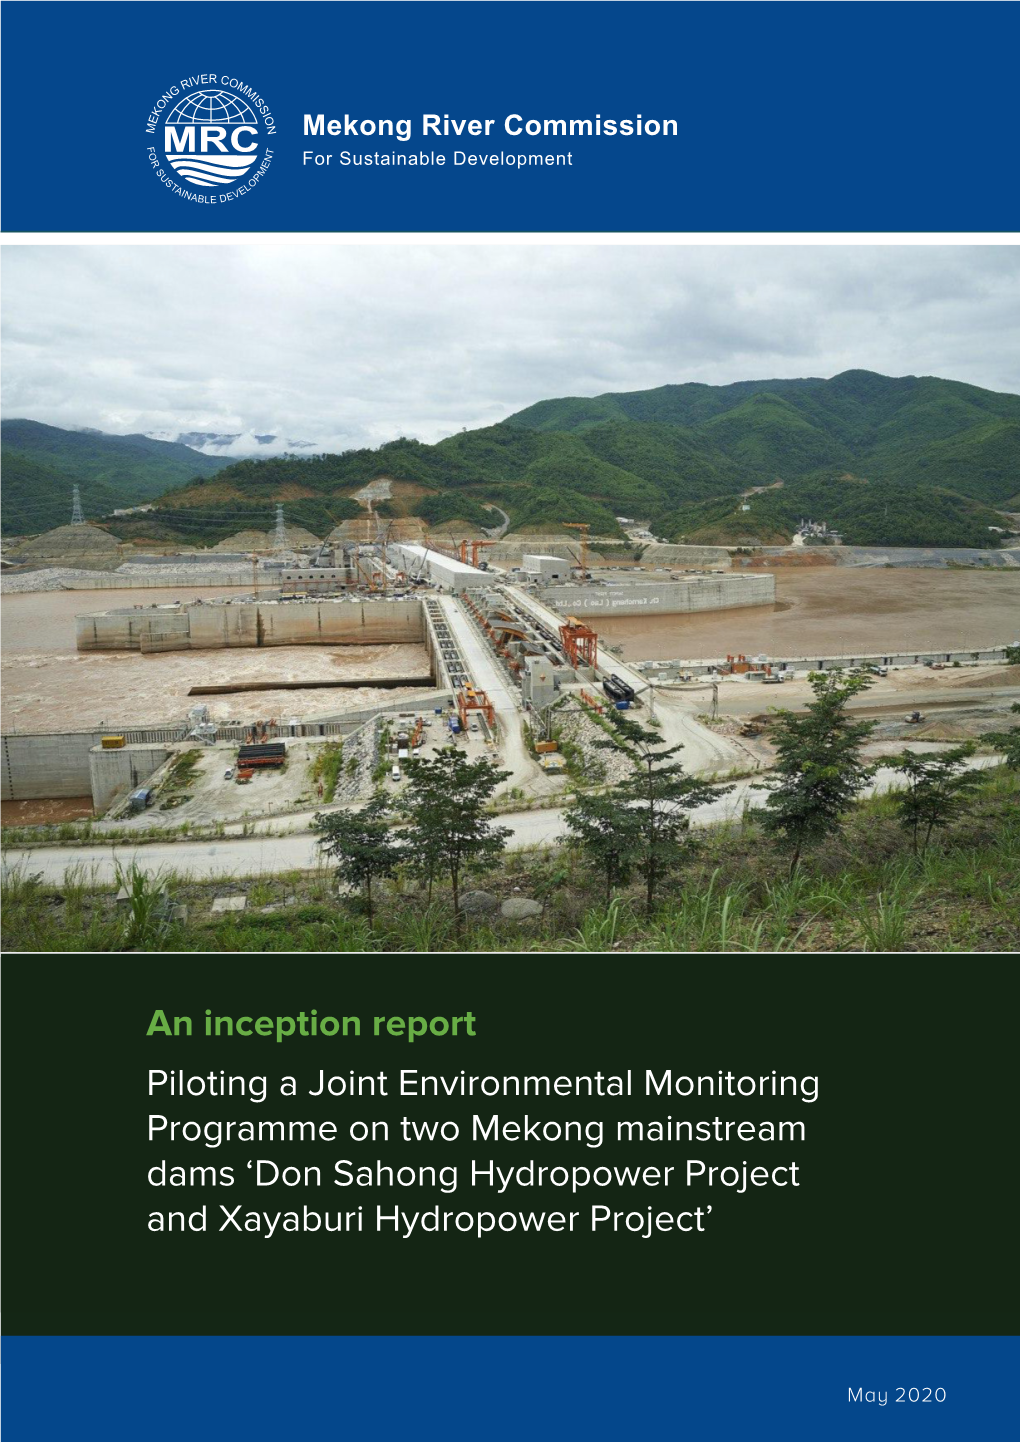 An Inception Report Piloting a Joint Environmental Monitoring Programme on Two Mekong Mainstream Dams ‘Don Sahong Hydropower Project and Xayaburi Hydropower Project’